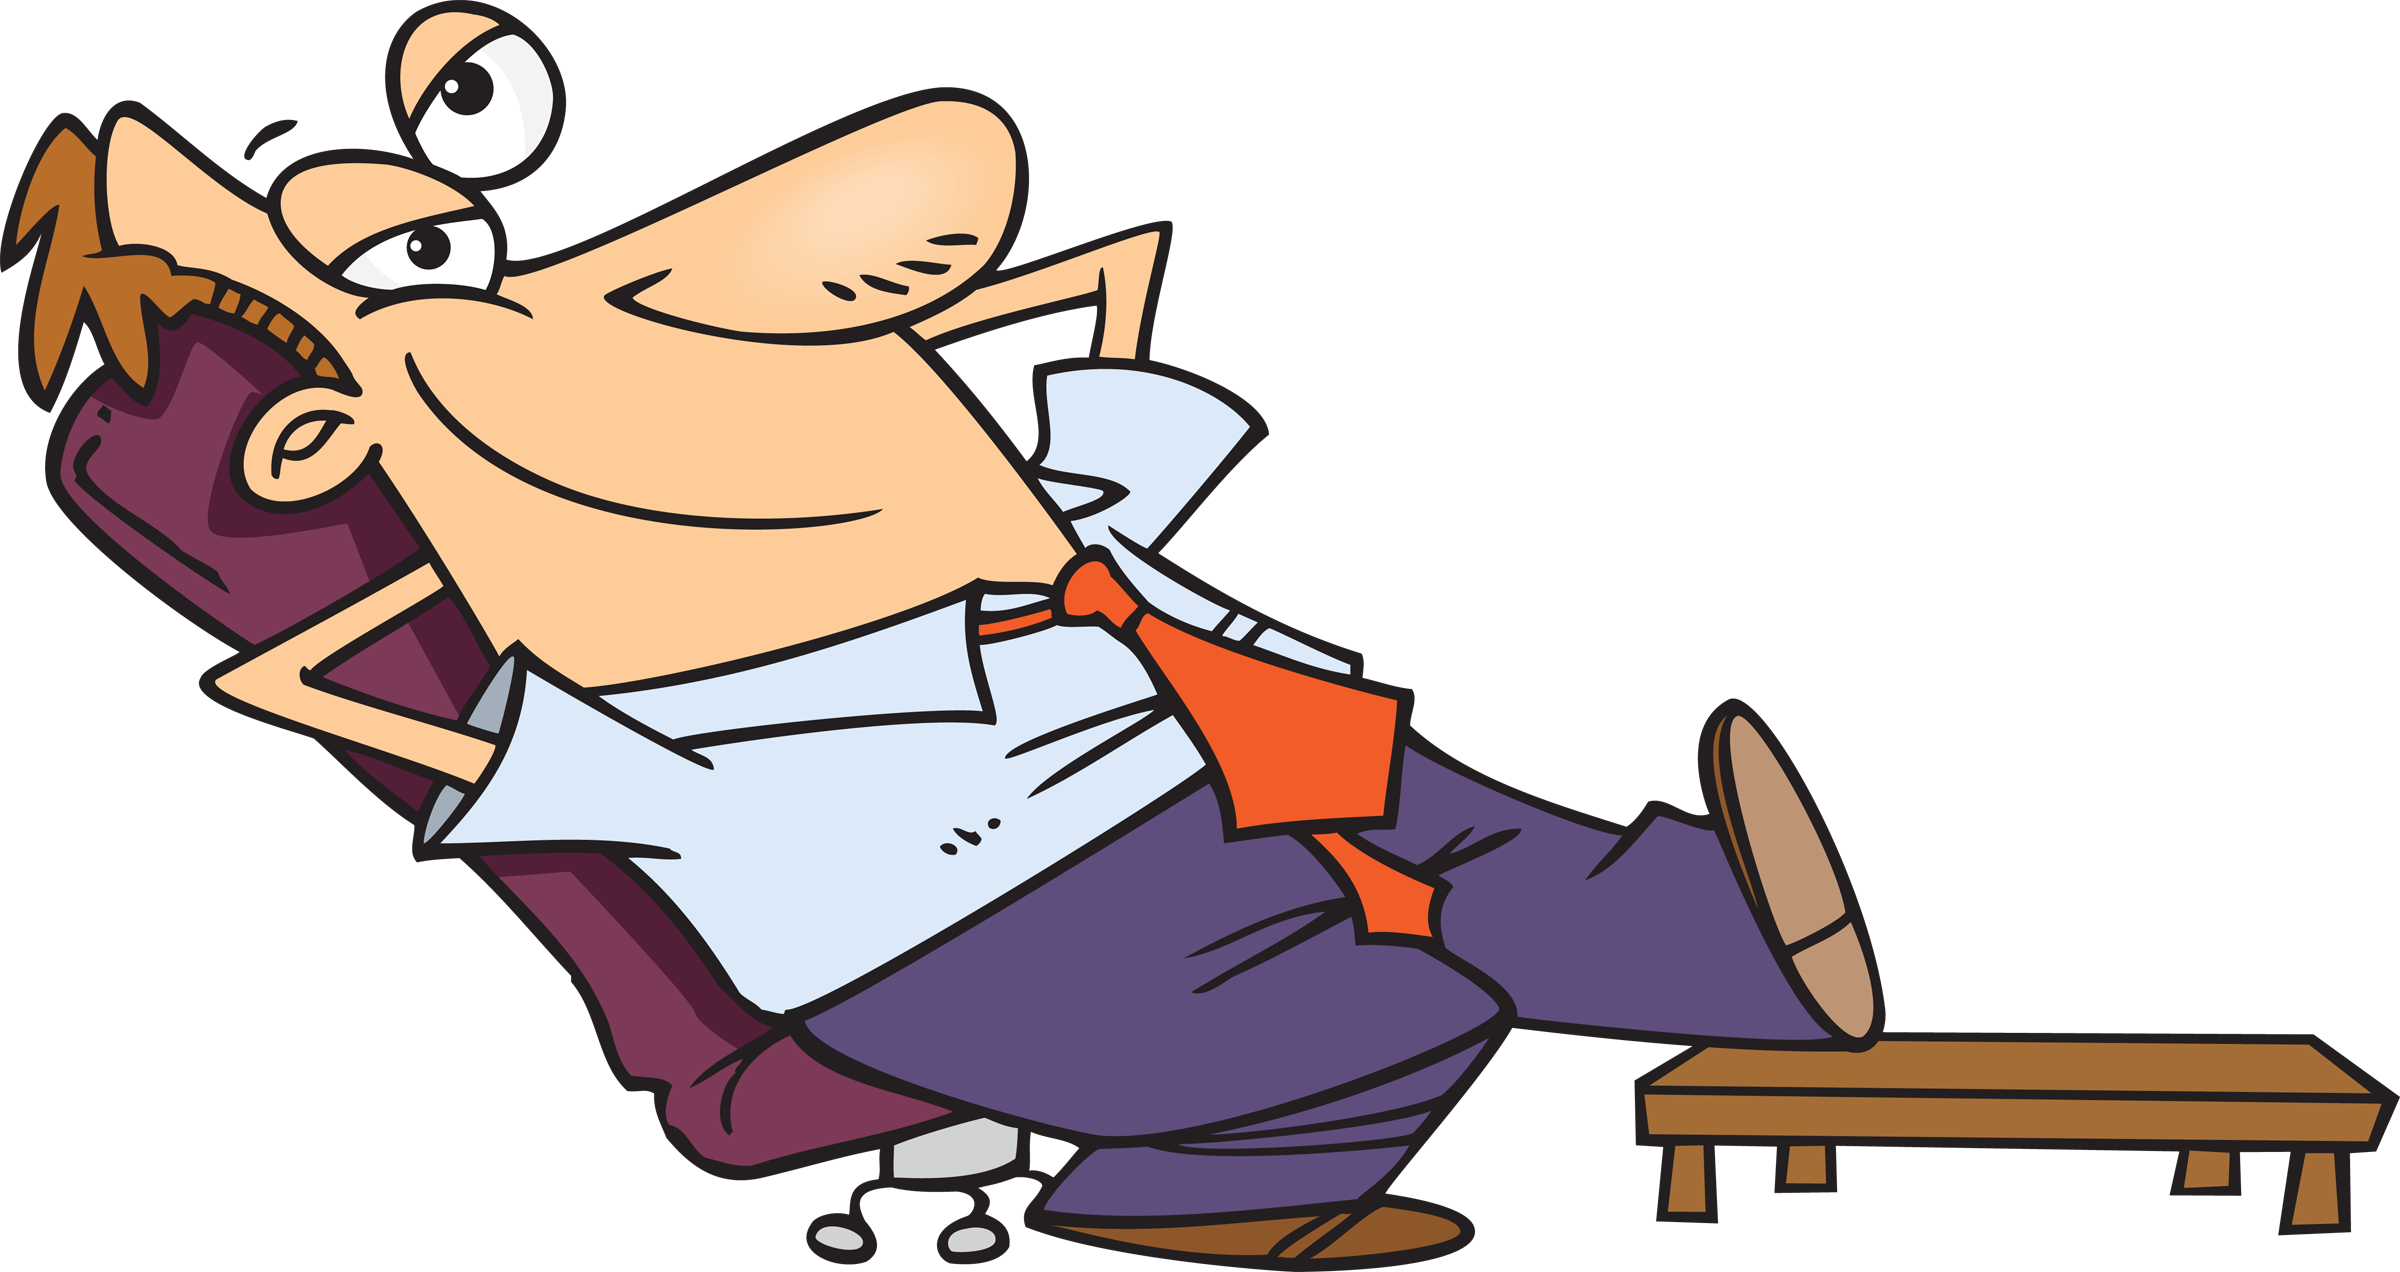 Clip Arts Related To : person relaxing clip art. 